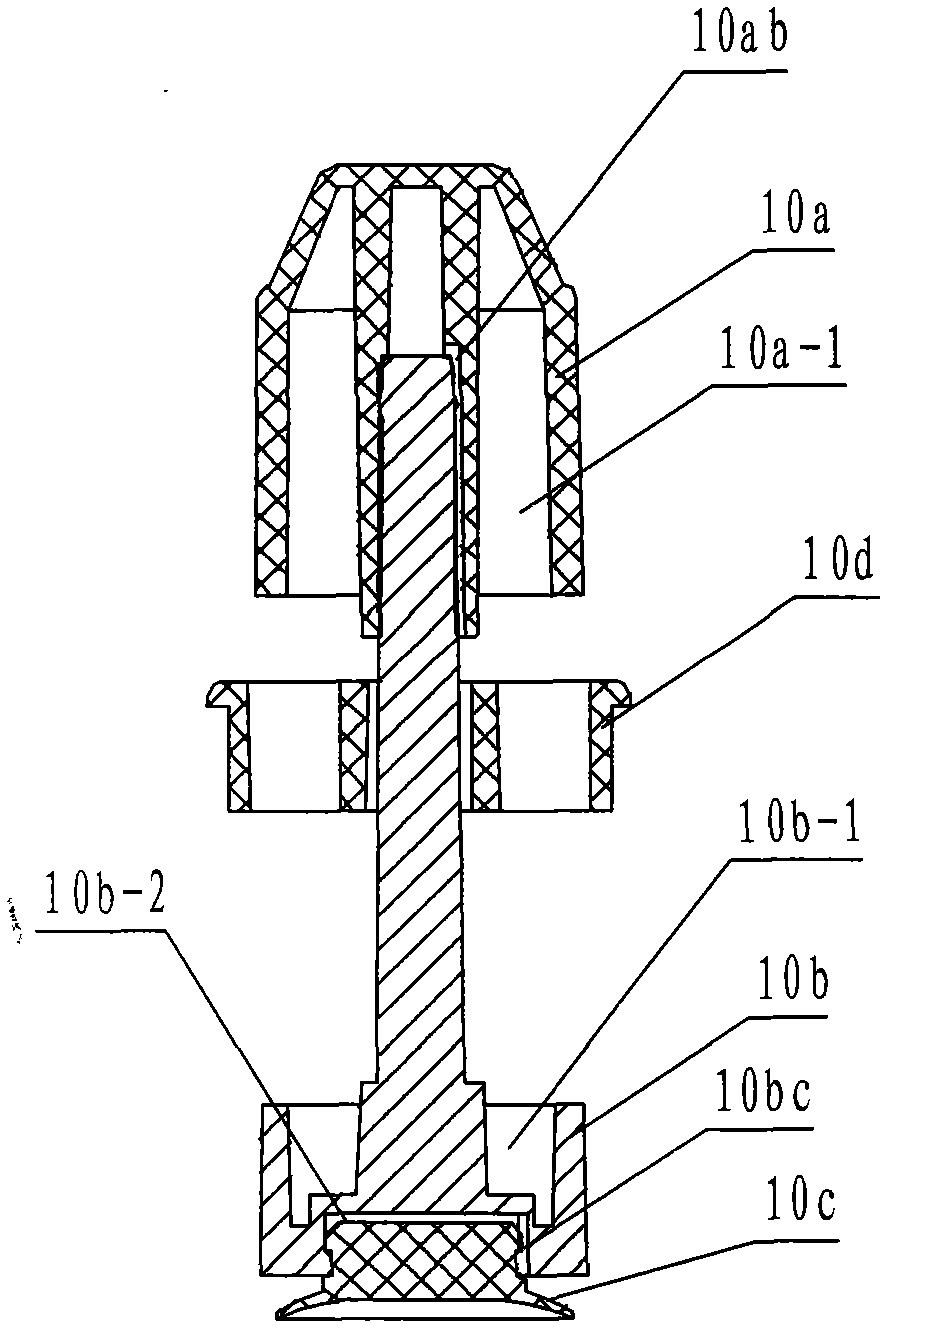 Disposable self-stopping infusion apparatus